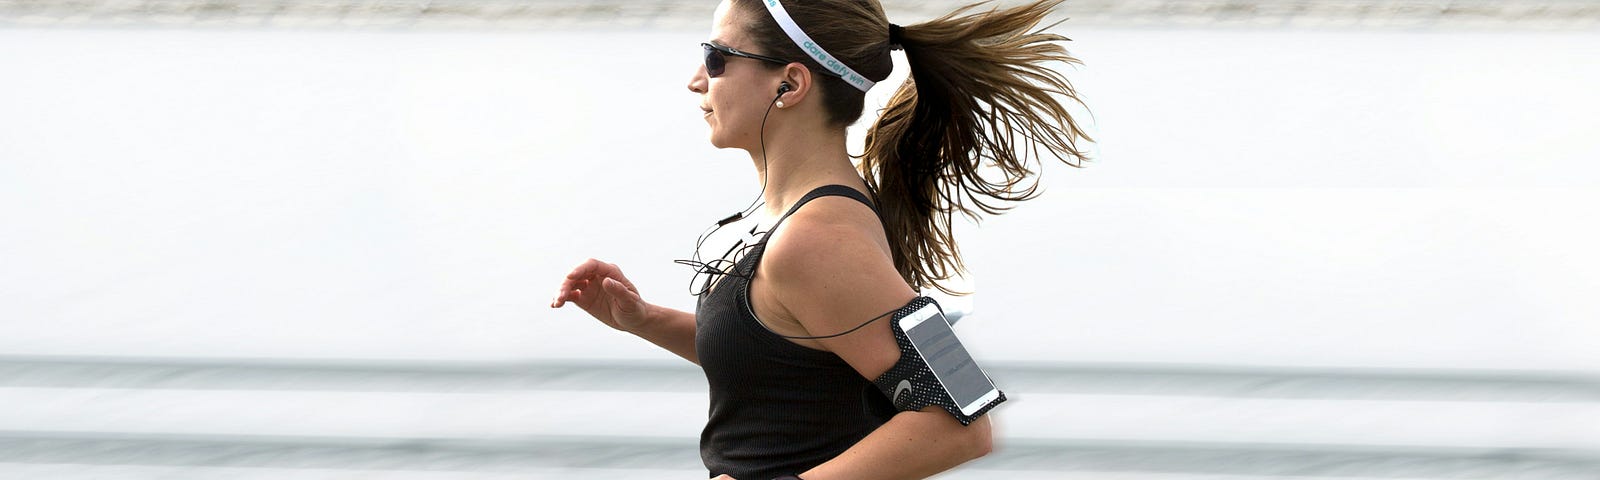 woman jogging in a black top and black leggings while listening to music.